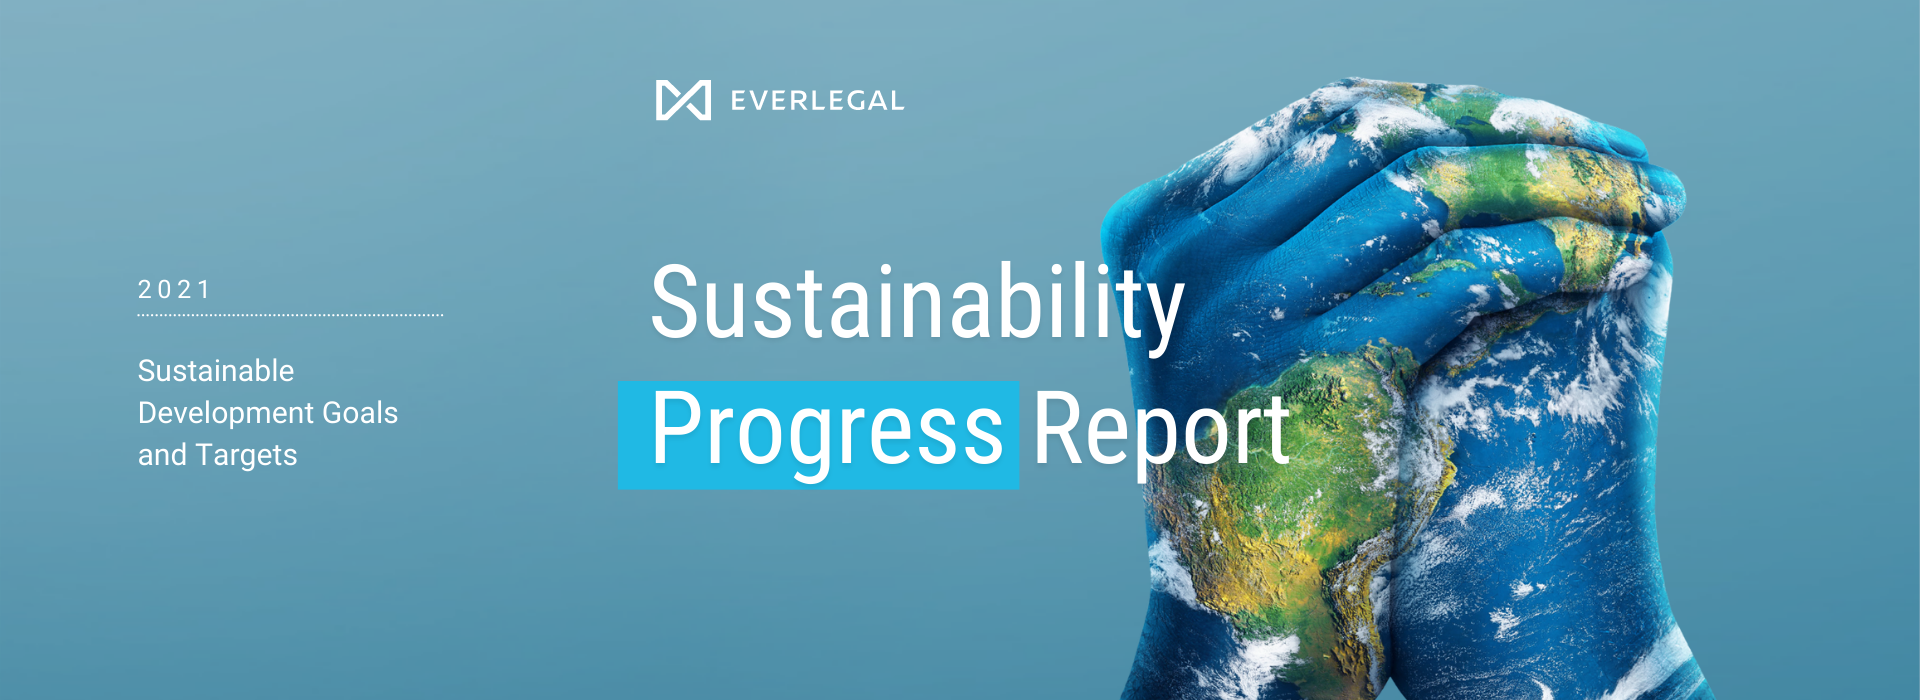 EVERLEGAL Sustainability Progress Report for 2021